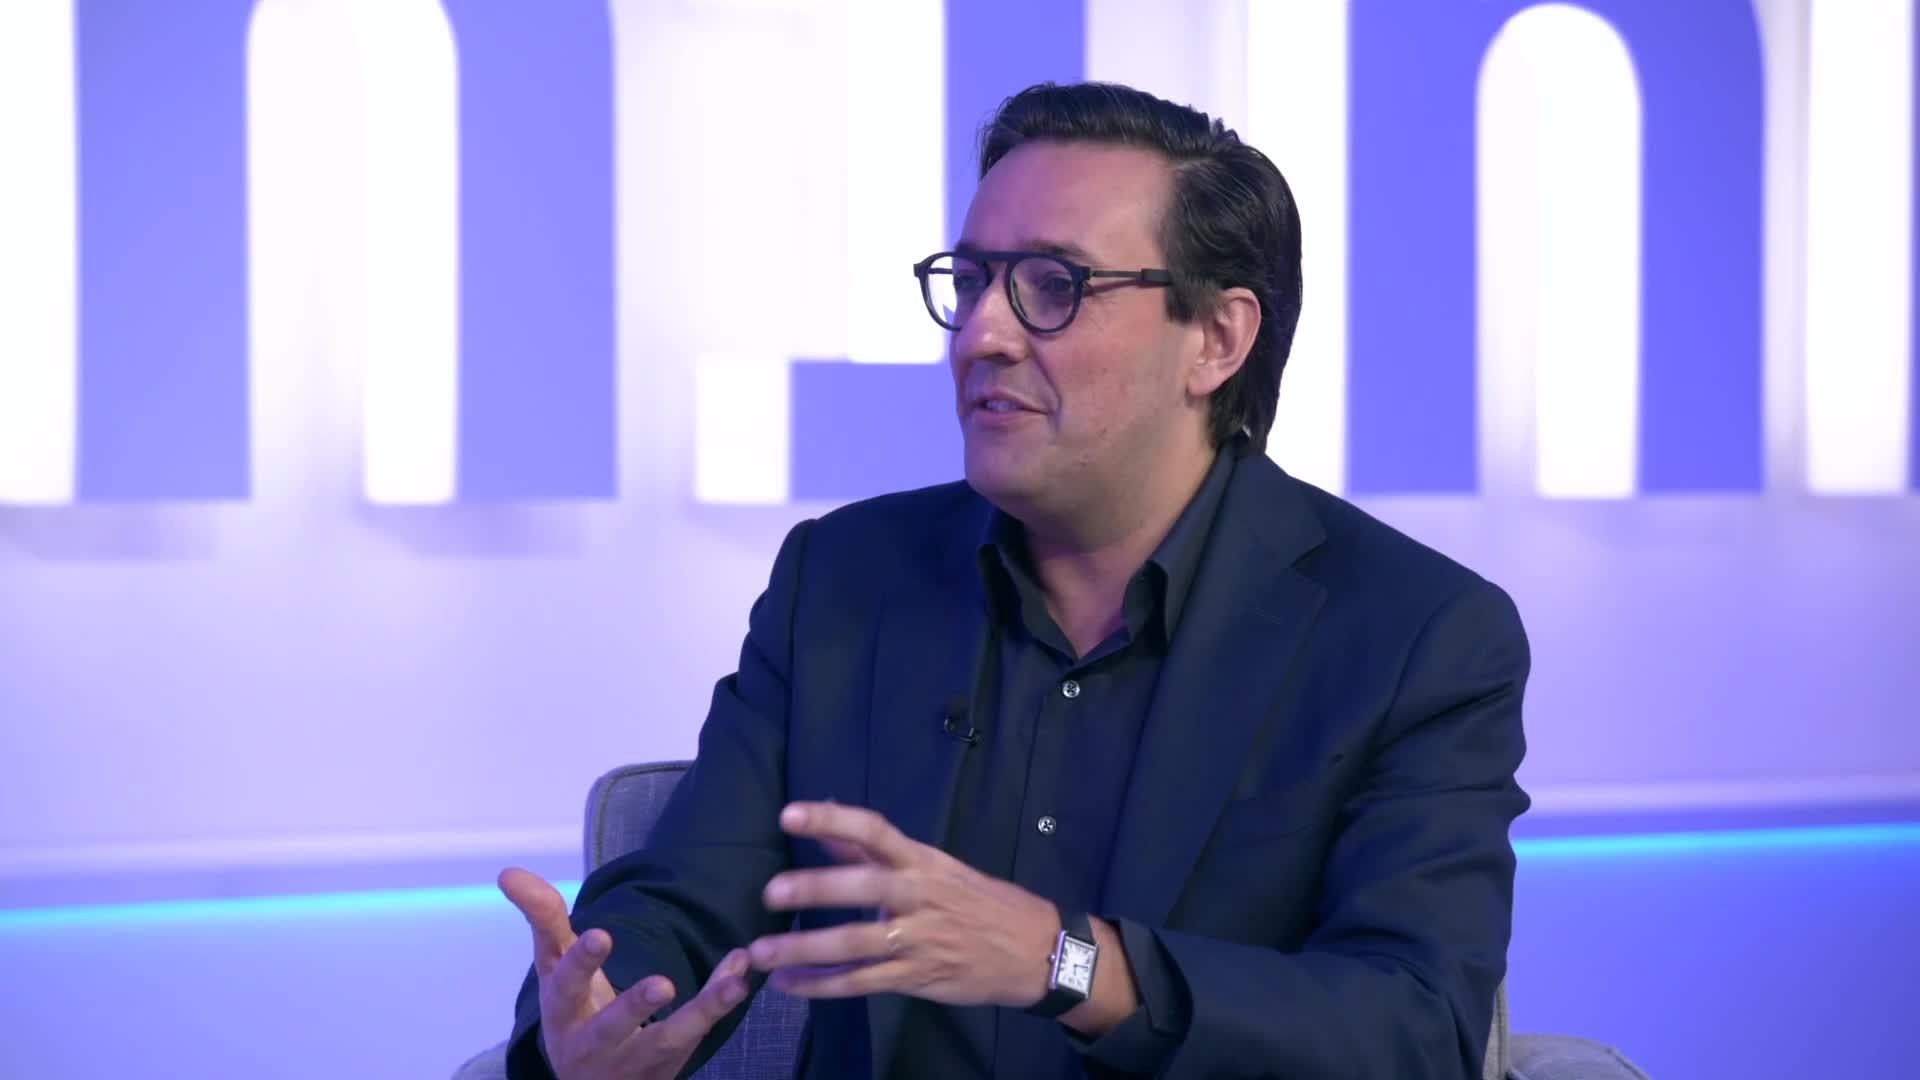 Interview with Dario Gil, SVP and Director of Research at IBM